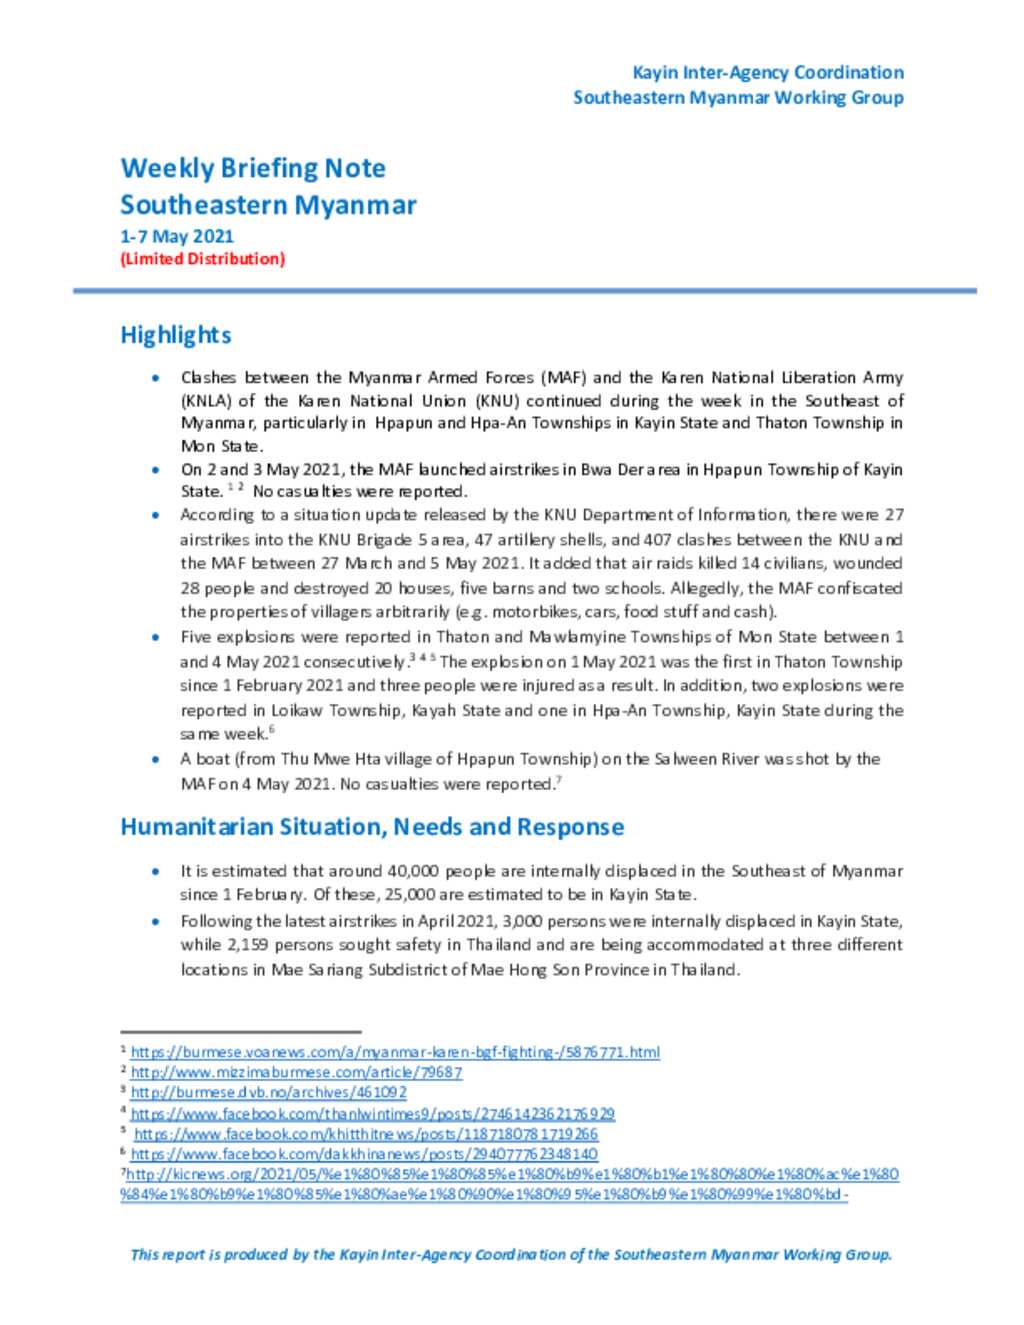 Document - Myanmar UNHCR Weekly Briefing Note (1-7 May 2021)